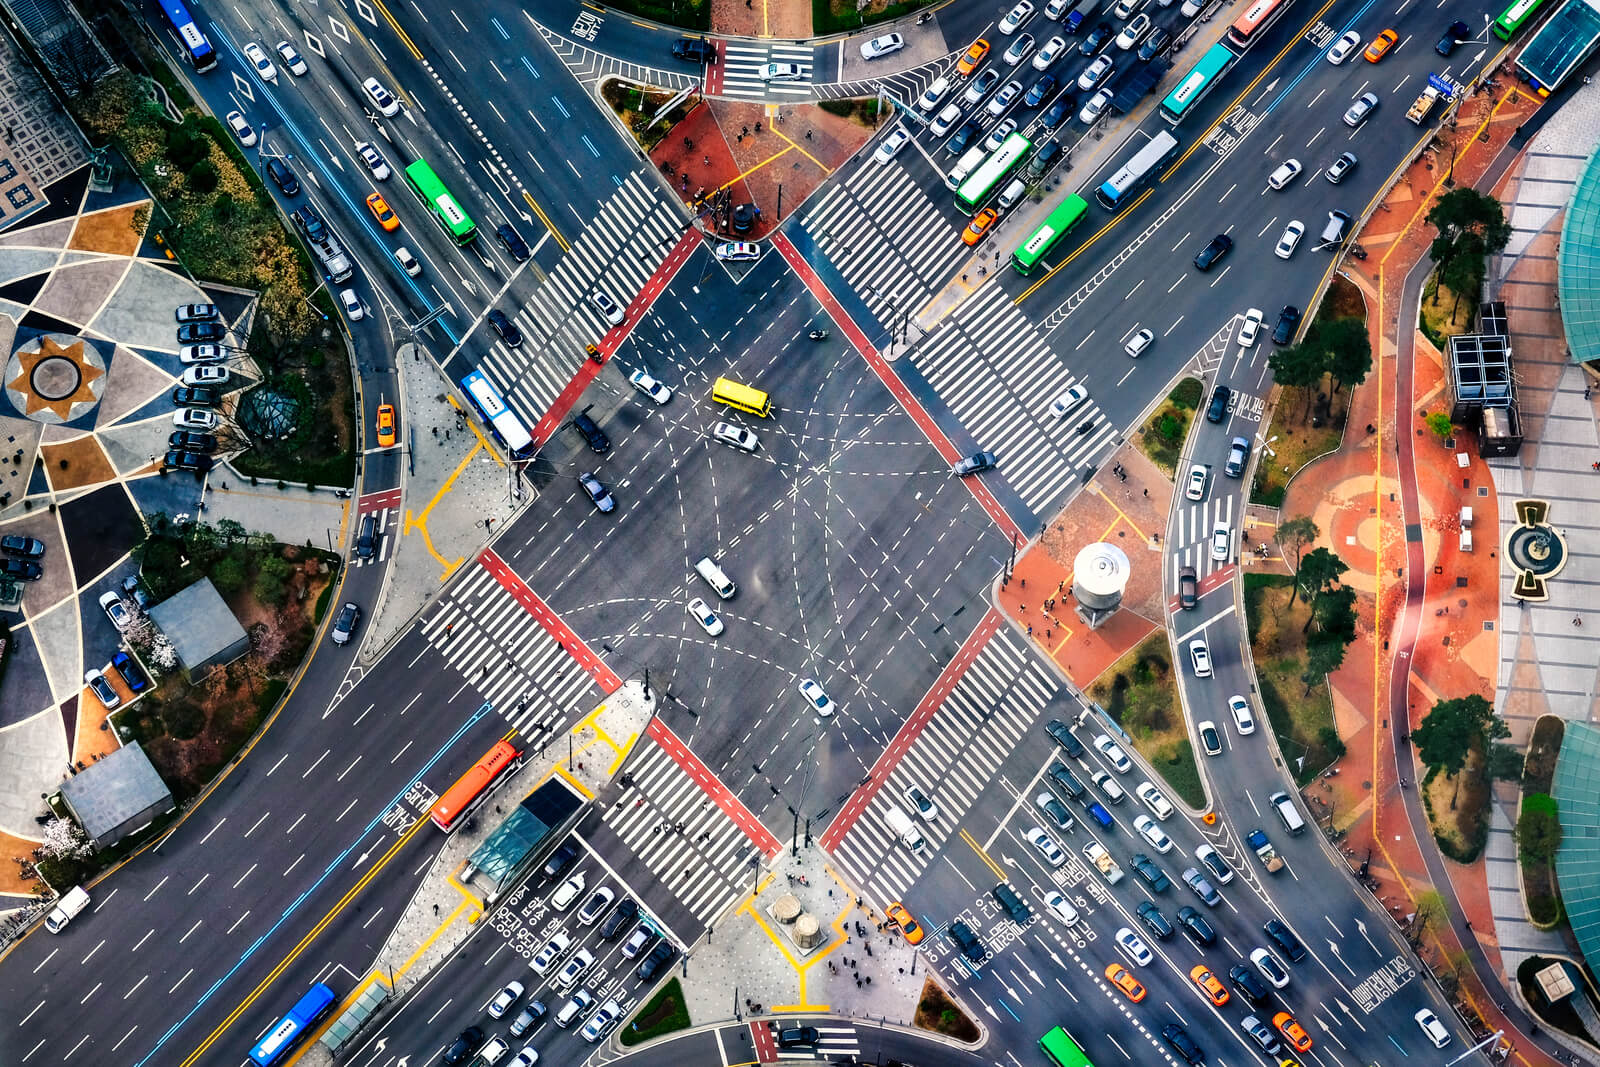 Aerial view of an intersection in Jamsil, Seoul, South Korea.